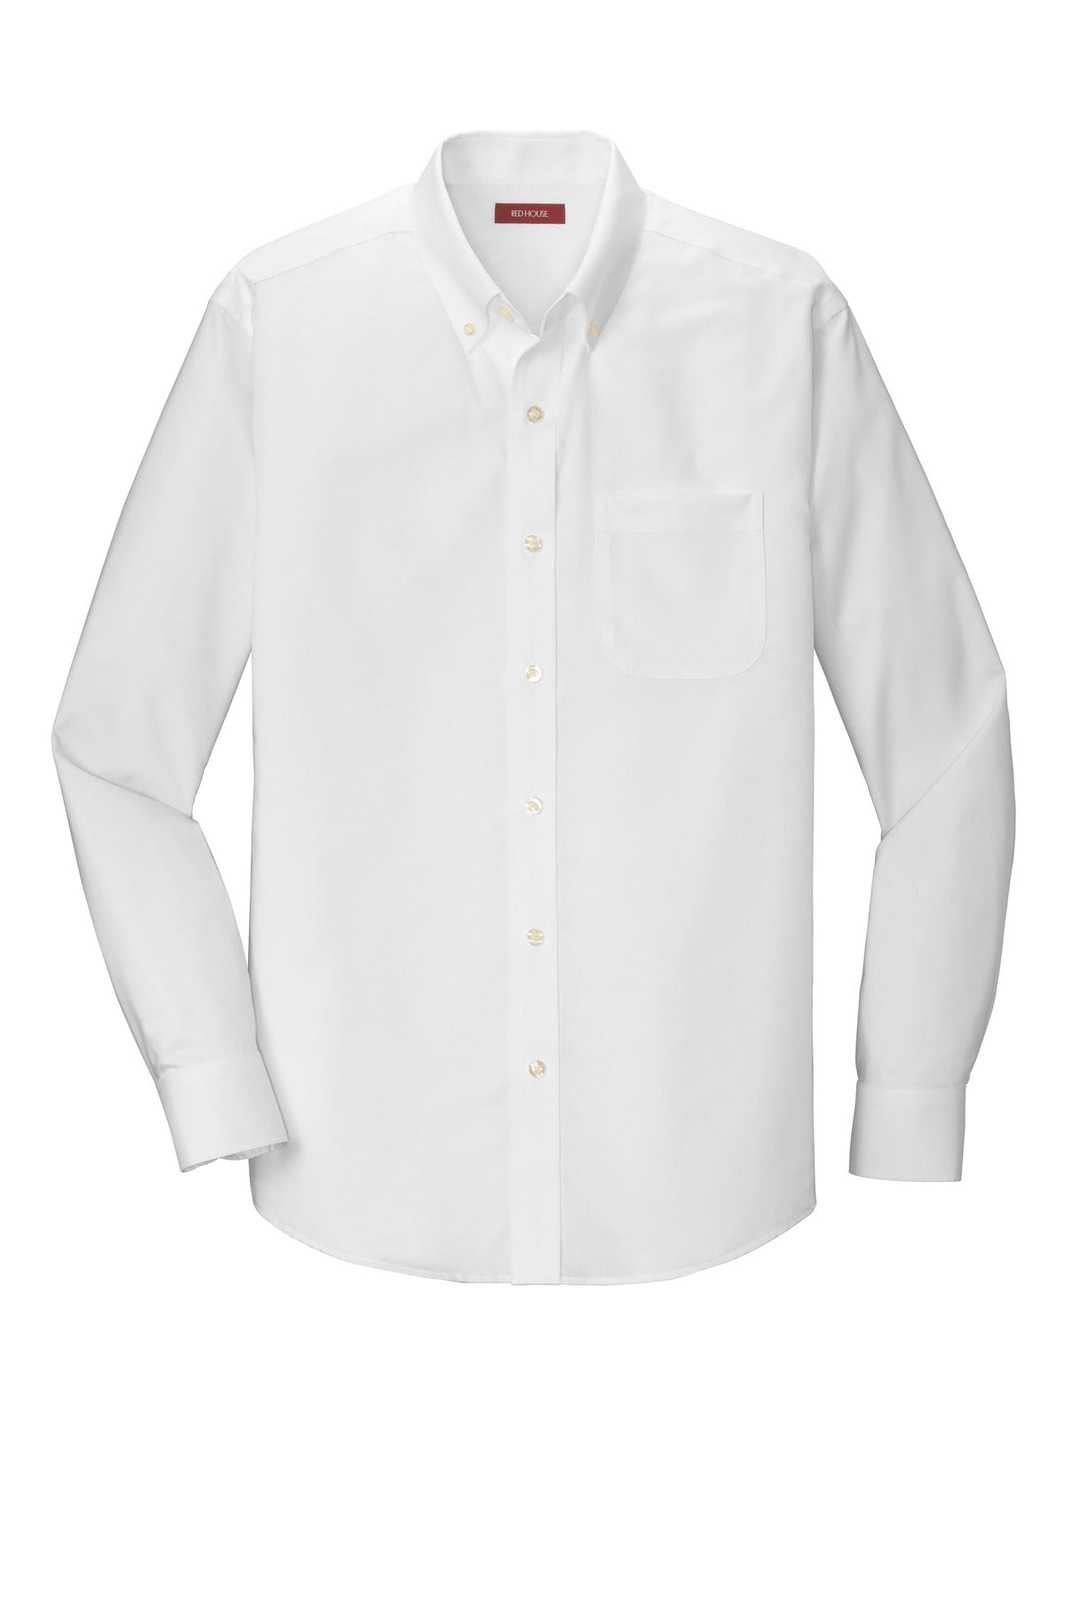 Red House RH240 Pinpoint Oxford Non-Iron Shirt - White - HIT a Double - 5